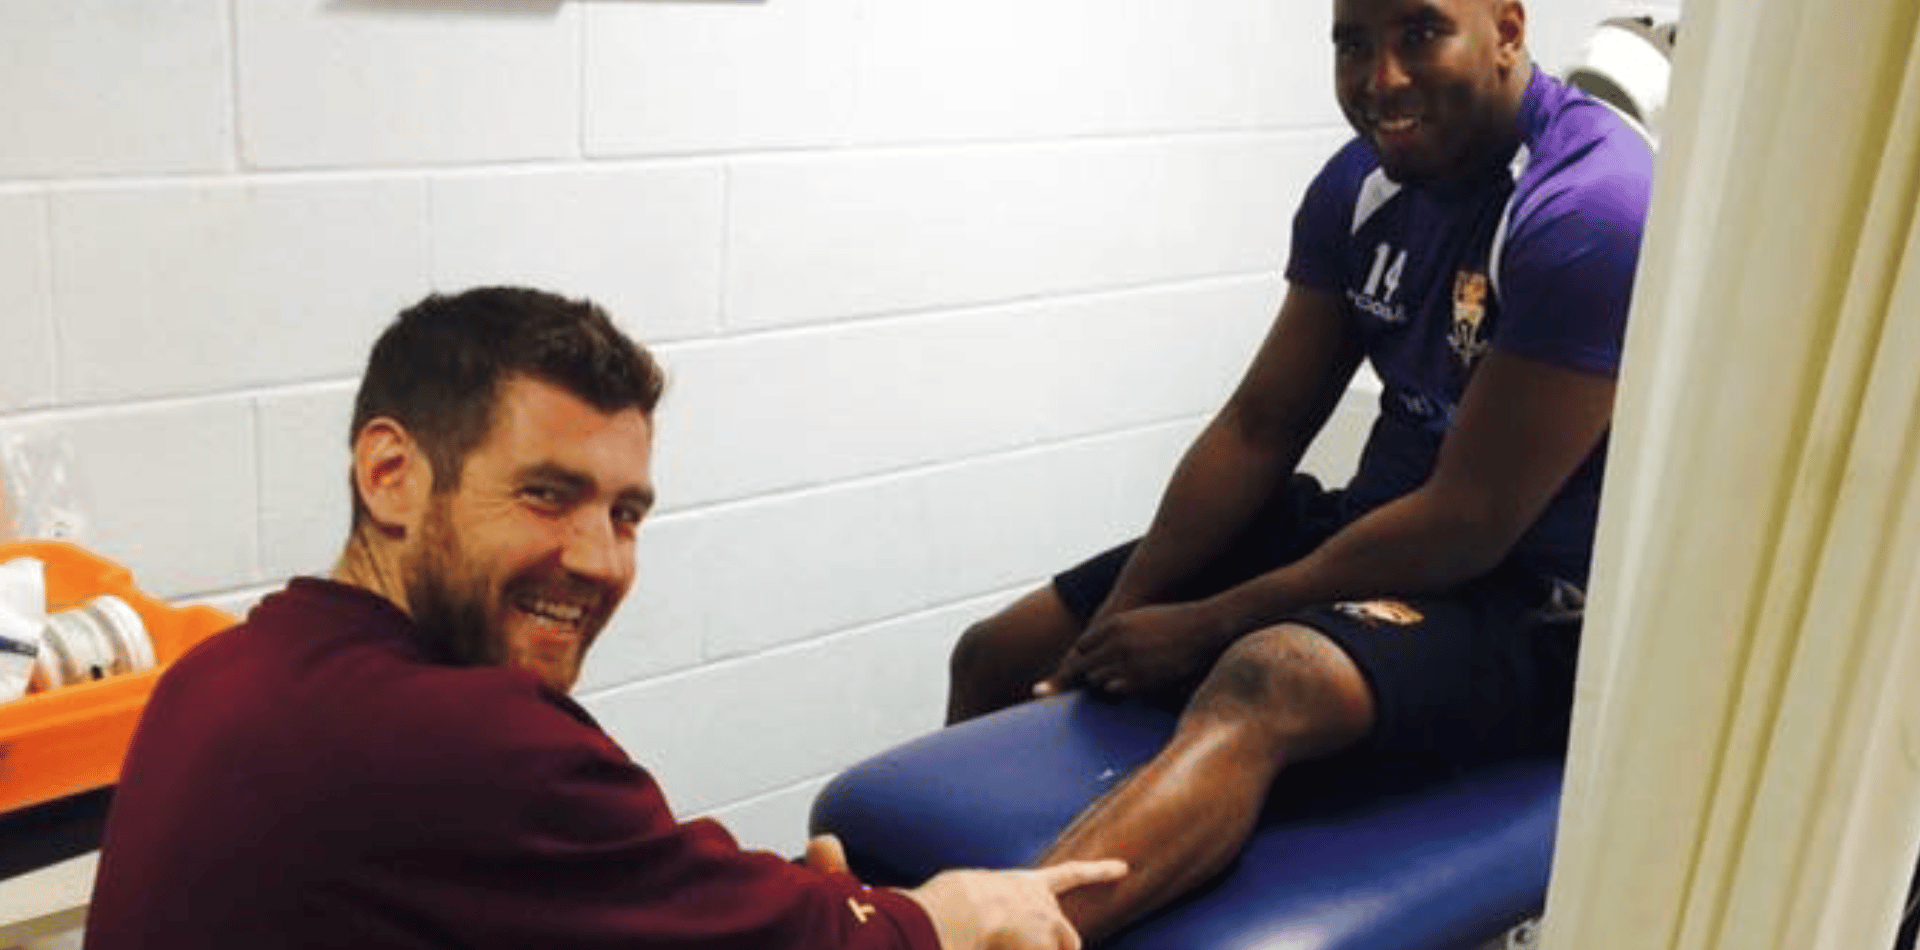 Dave O’Sullivan physiotherapist using hands-on treatment on pro sport patient at Huddersfield Giants Rugby League